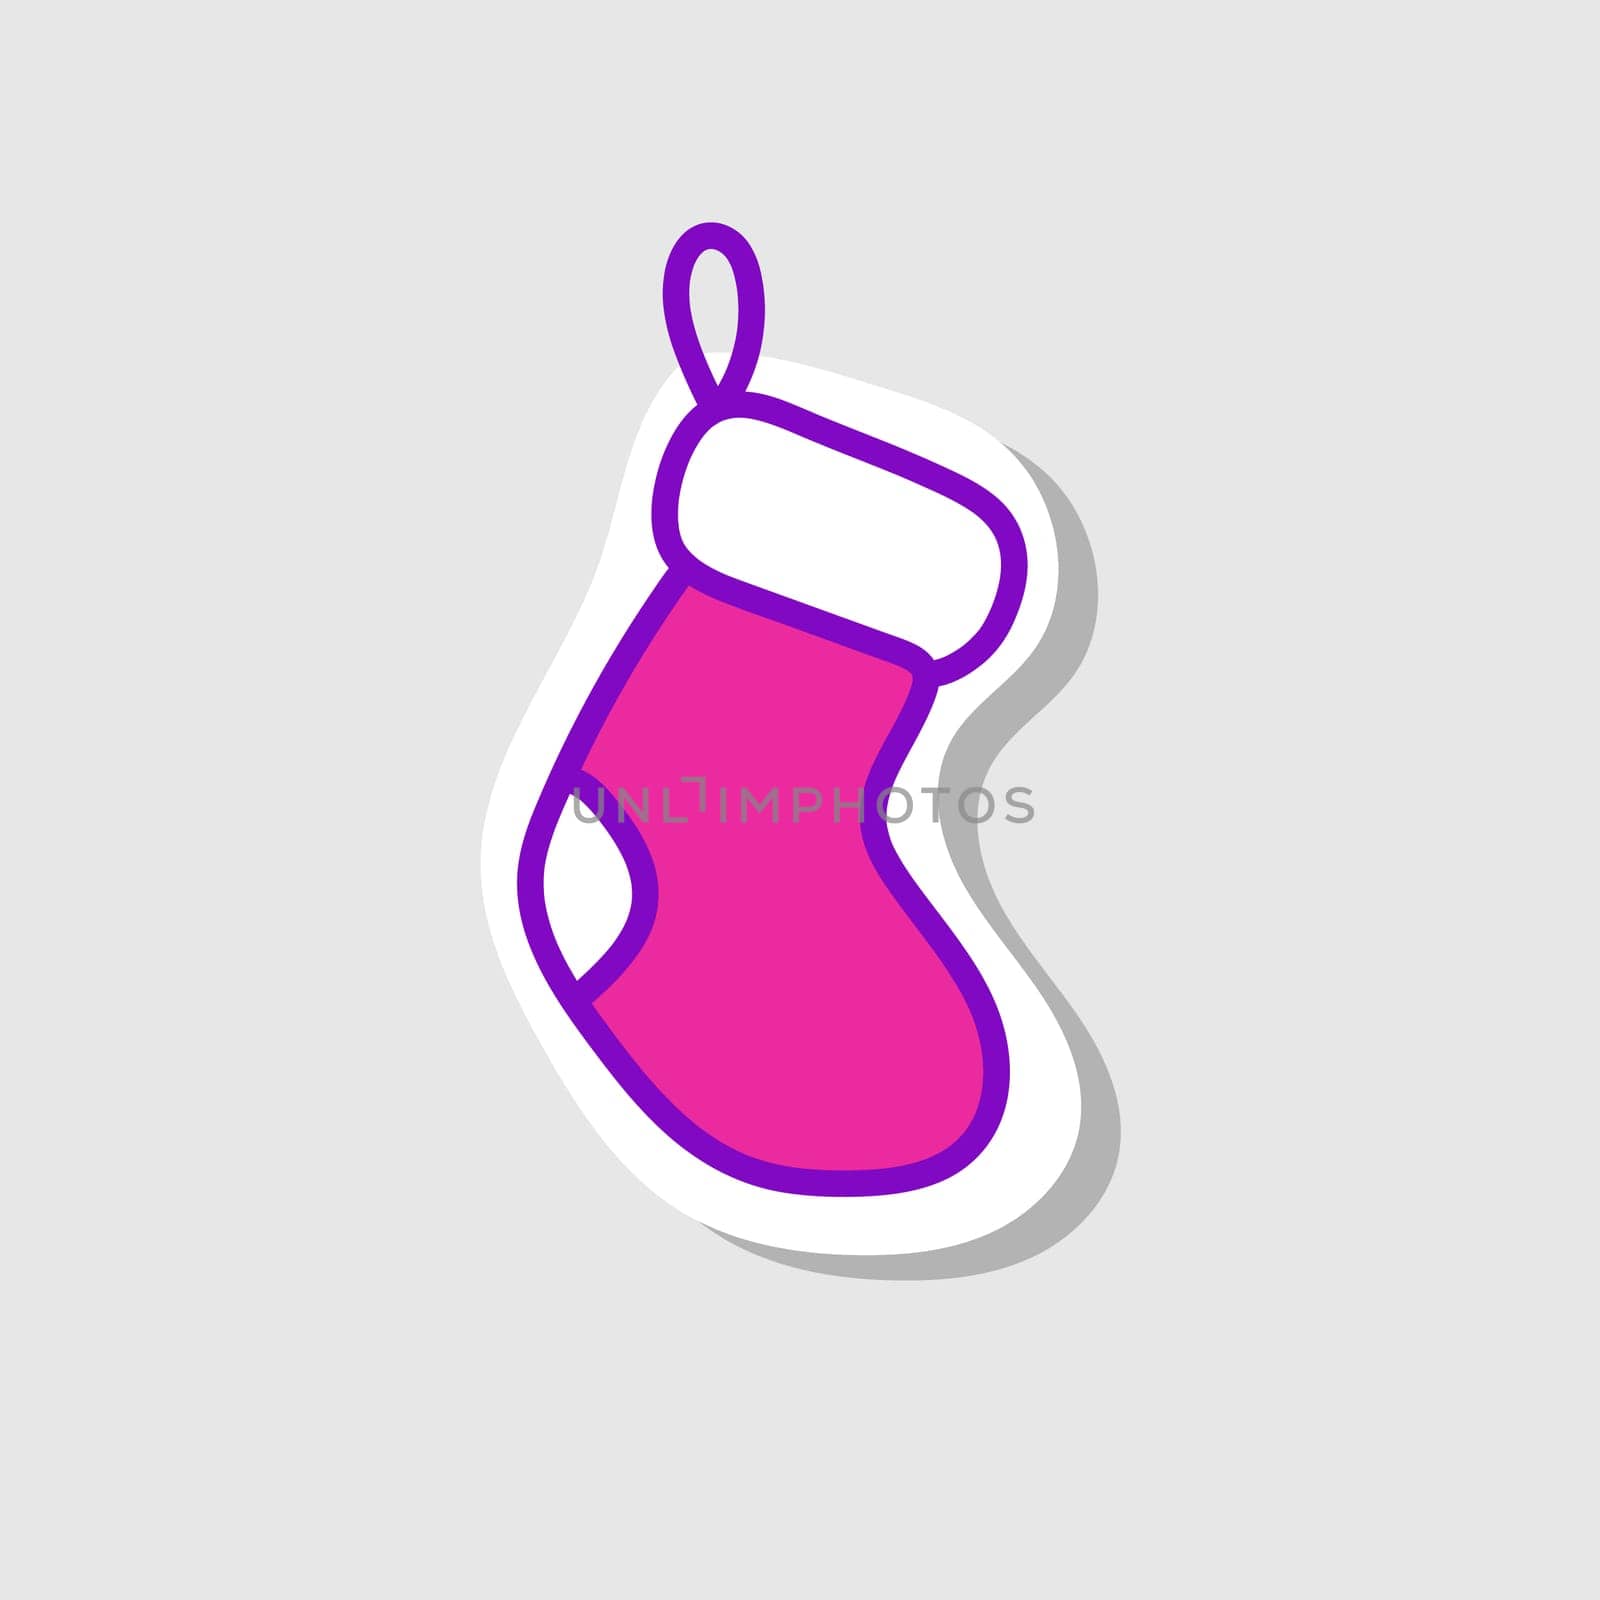 Holiday greeting sticker for card. Christmas stocking element. Festive hand drawn design on grey